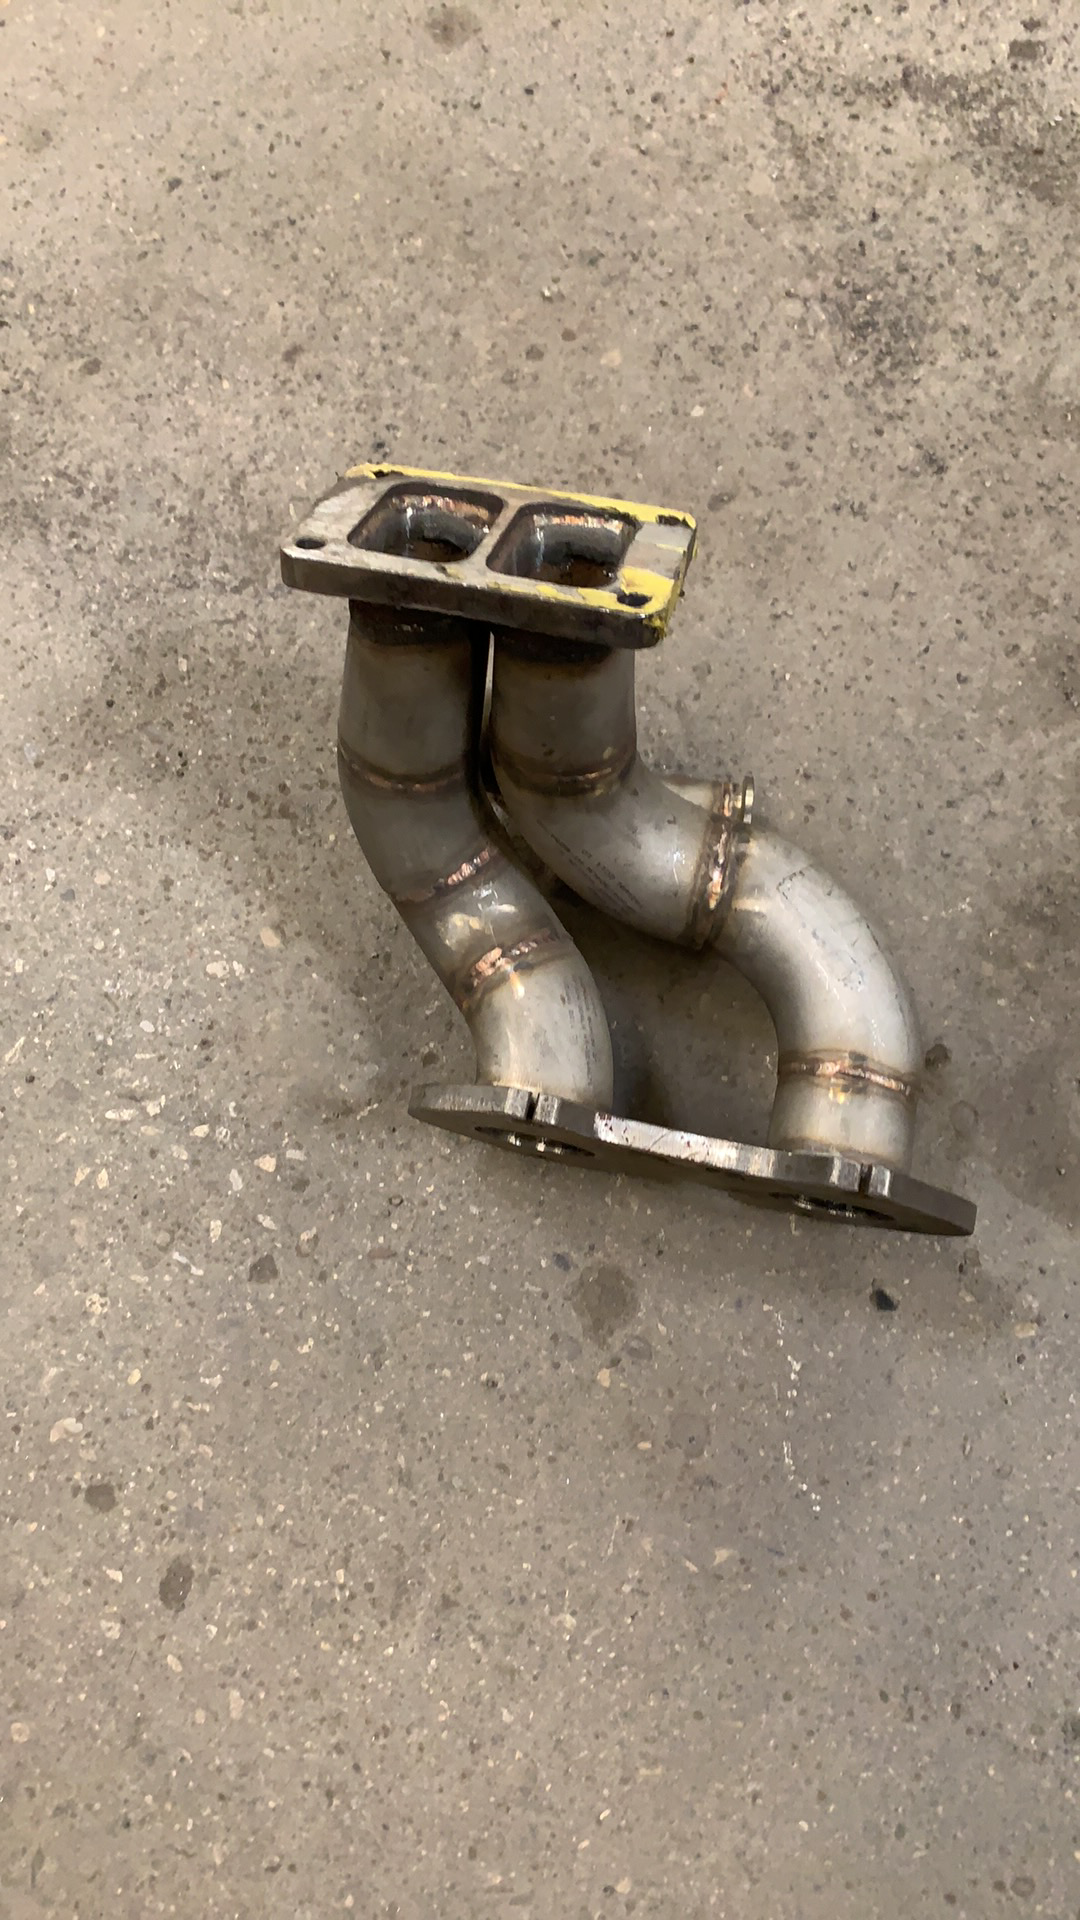 Engine - Power Adders - Performance parts - Used - 1993 to 1995 Mazda RX-7 - Grove City, OH 43123, United States